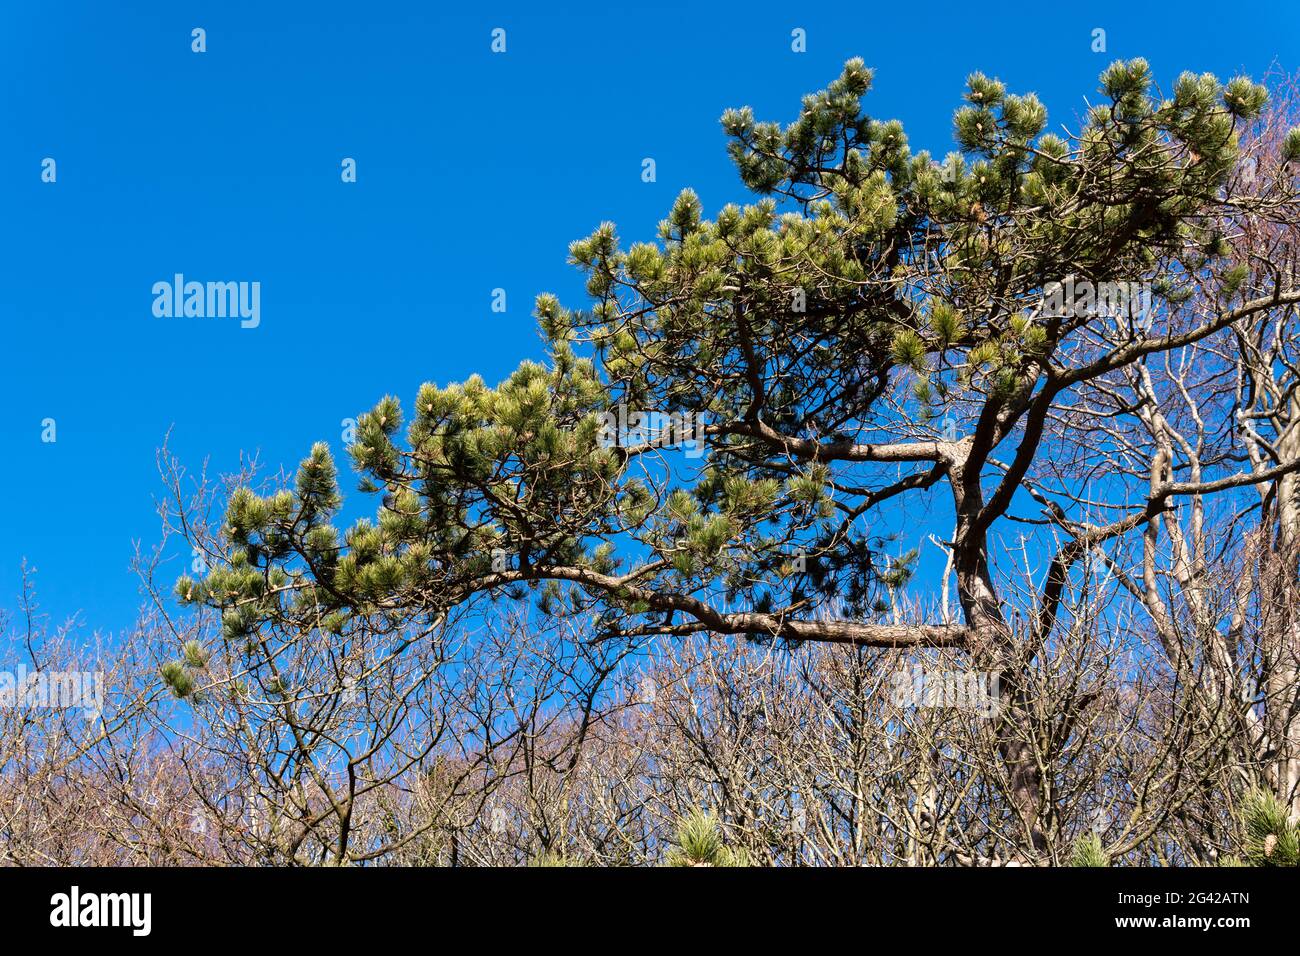 Pine tree in winter against a brilliant blue sky Stock Photo